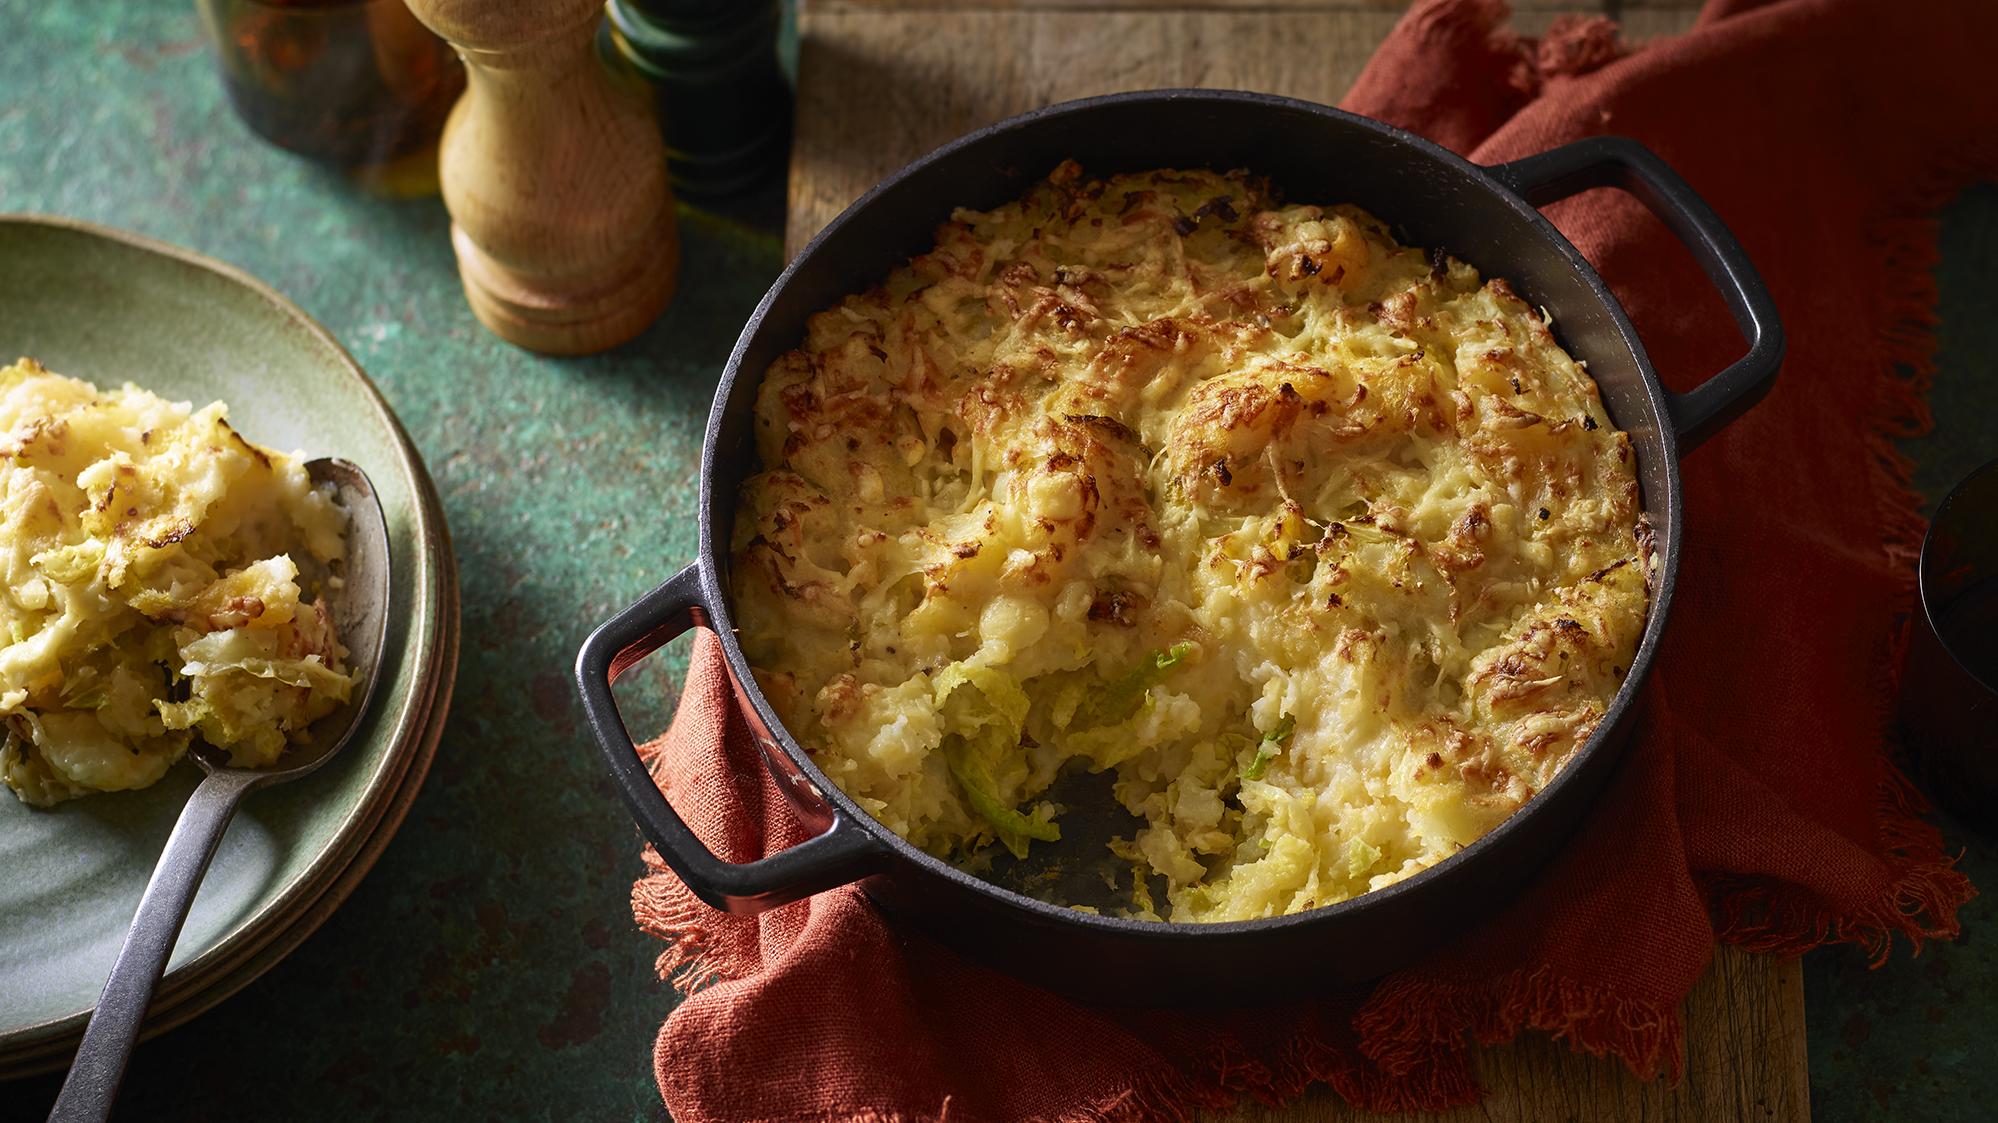  Simple yet scrumptious, Rumbledethumps is a classic Scottish dish everyone will love.